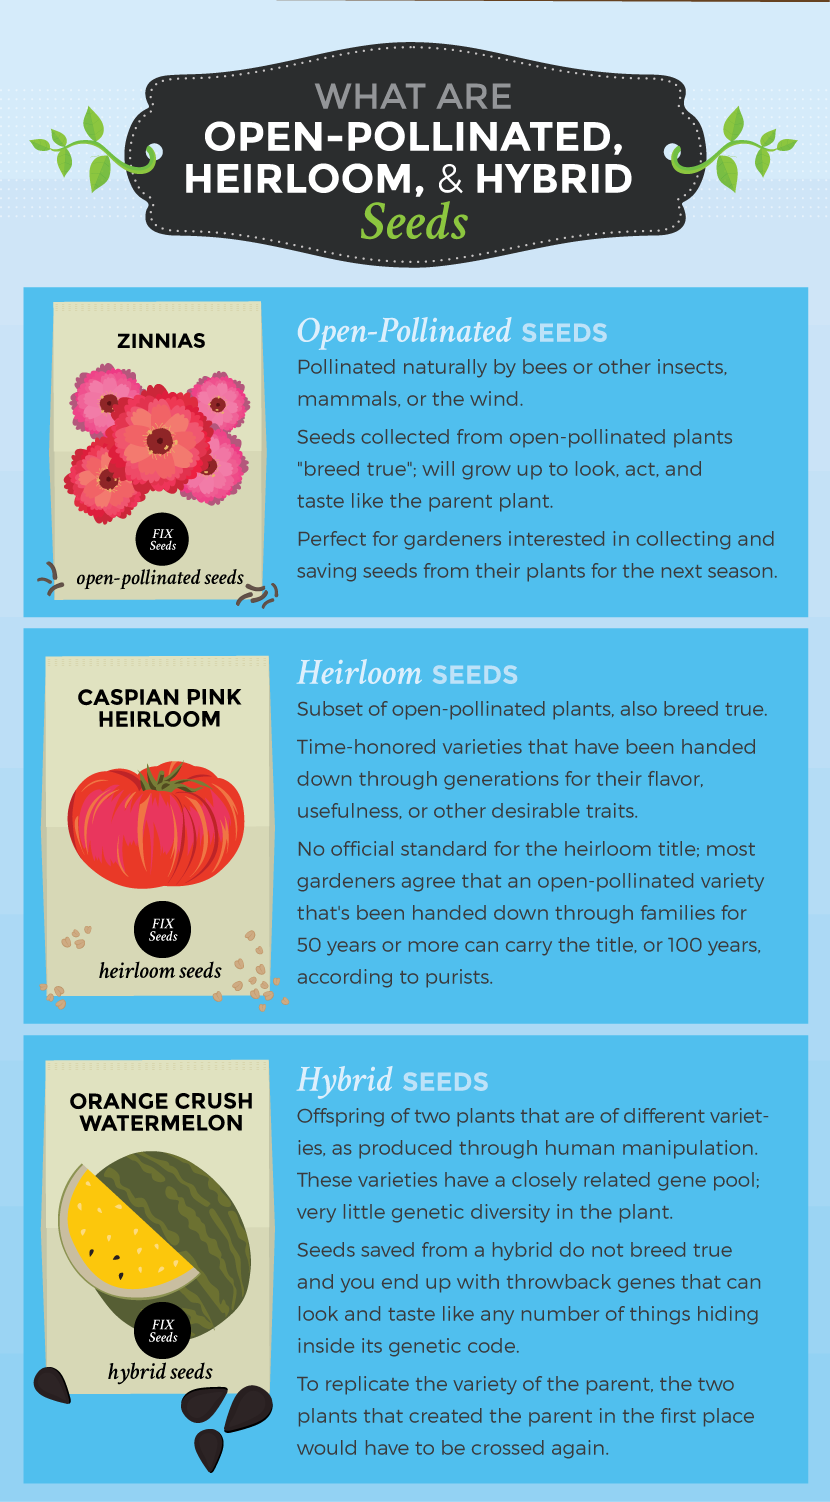 Open-Pollinated, Heirloom, and Hybrid Seeds - Starting Seeds in Winter for a Spring Garden